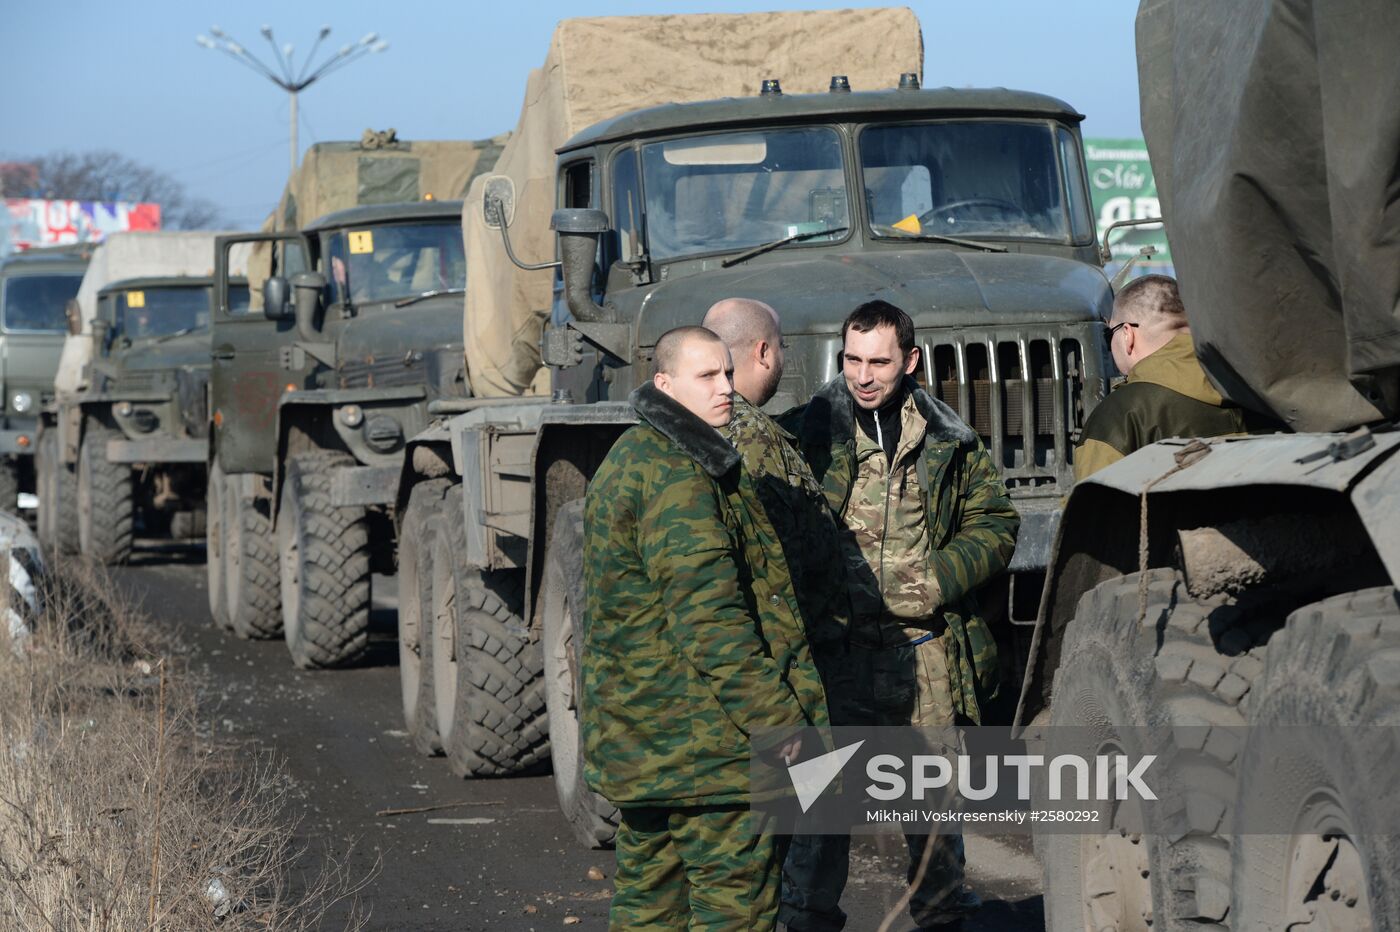 Donetsk Republic's militia start withdrawal of Grad multiple rocket launcher systems